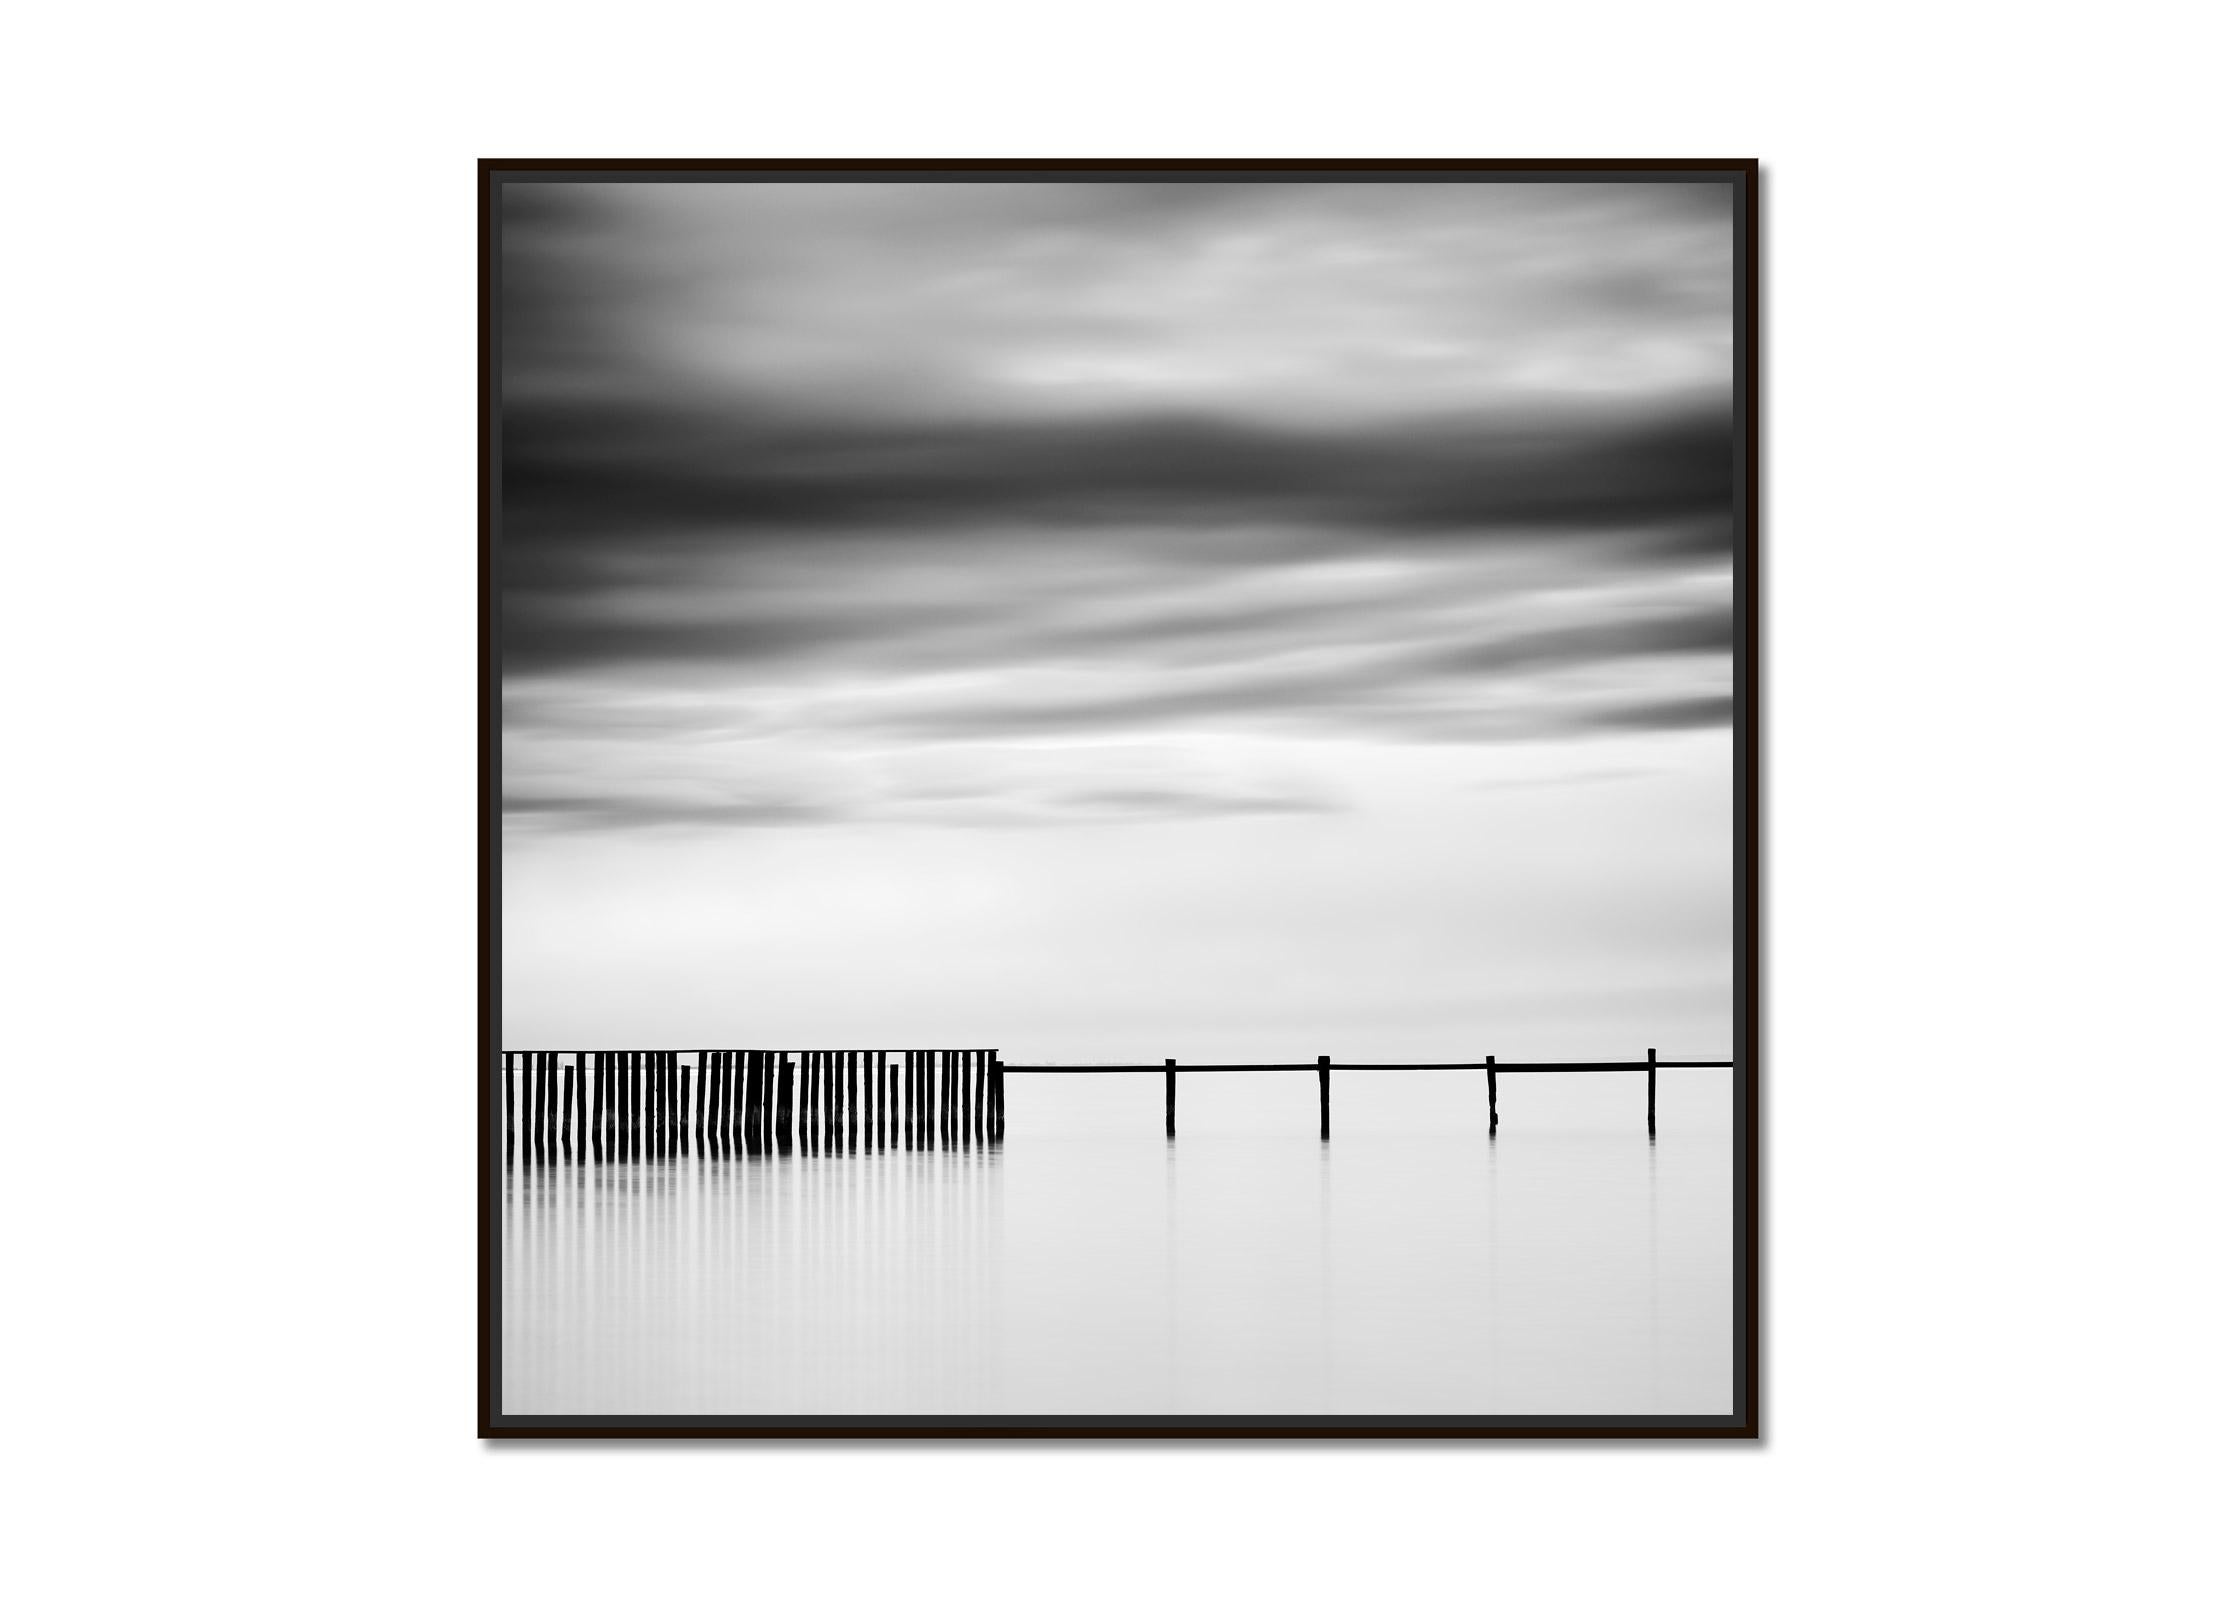 Swimming Area, cloudy, lake, black and white long exposure landscape photography - Photograph by Gerald Berghammer